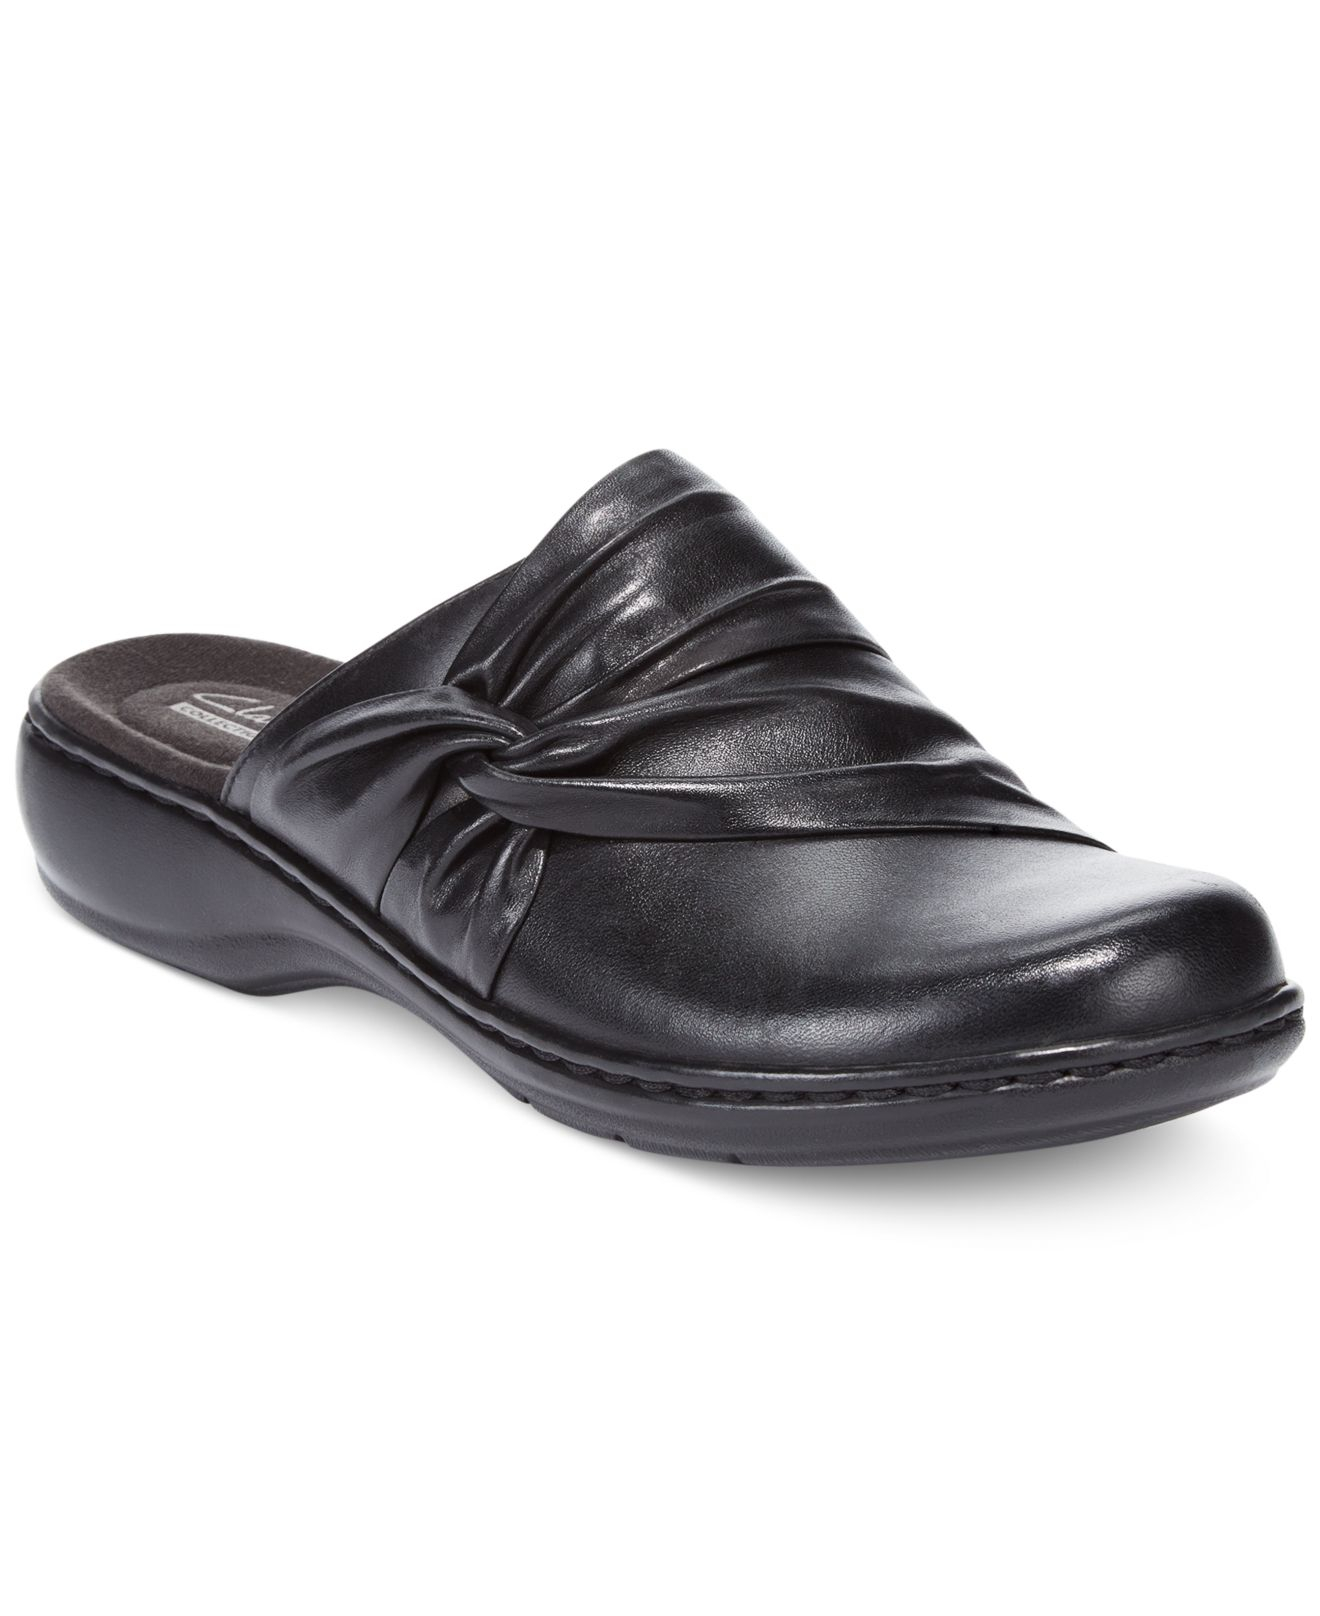 Clarks Collections Womens Leisa Deina Clogs in Black - Lyst